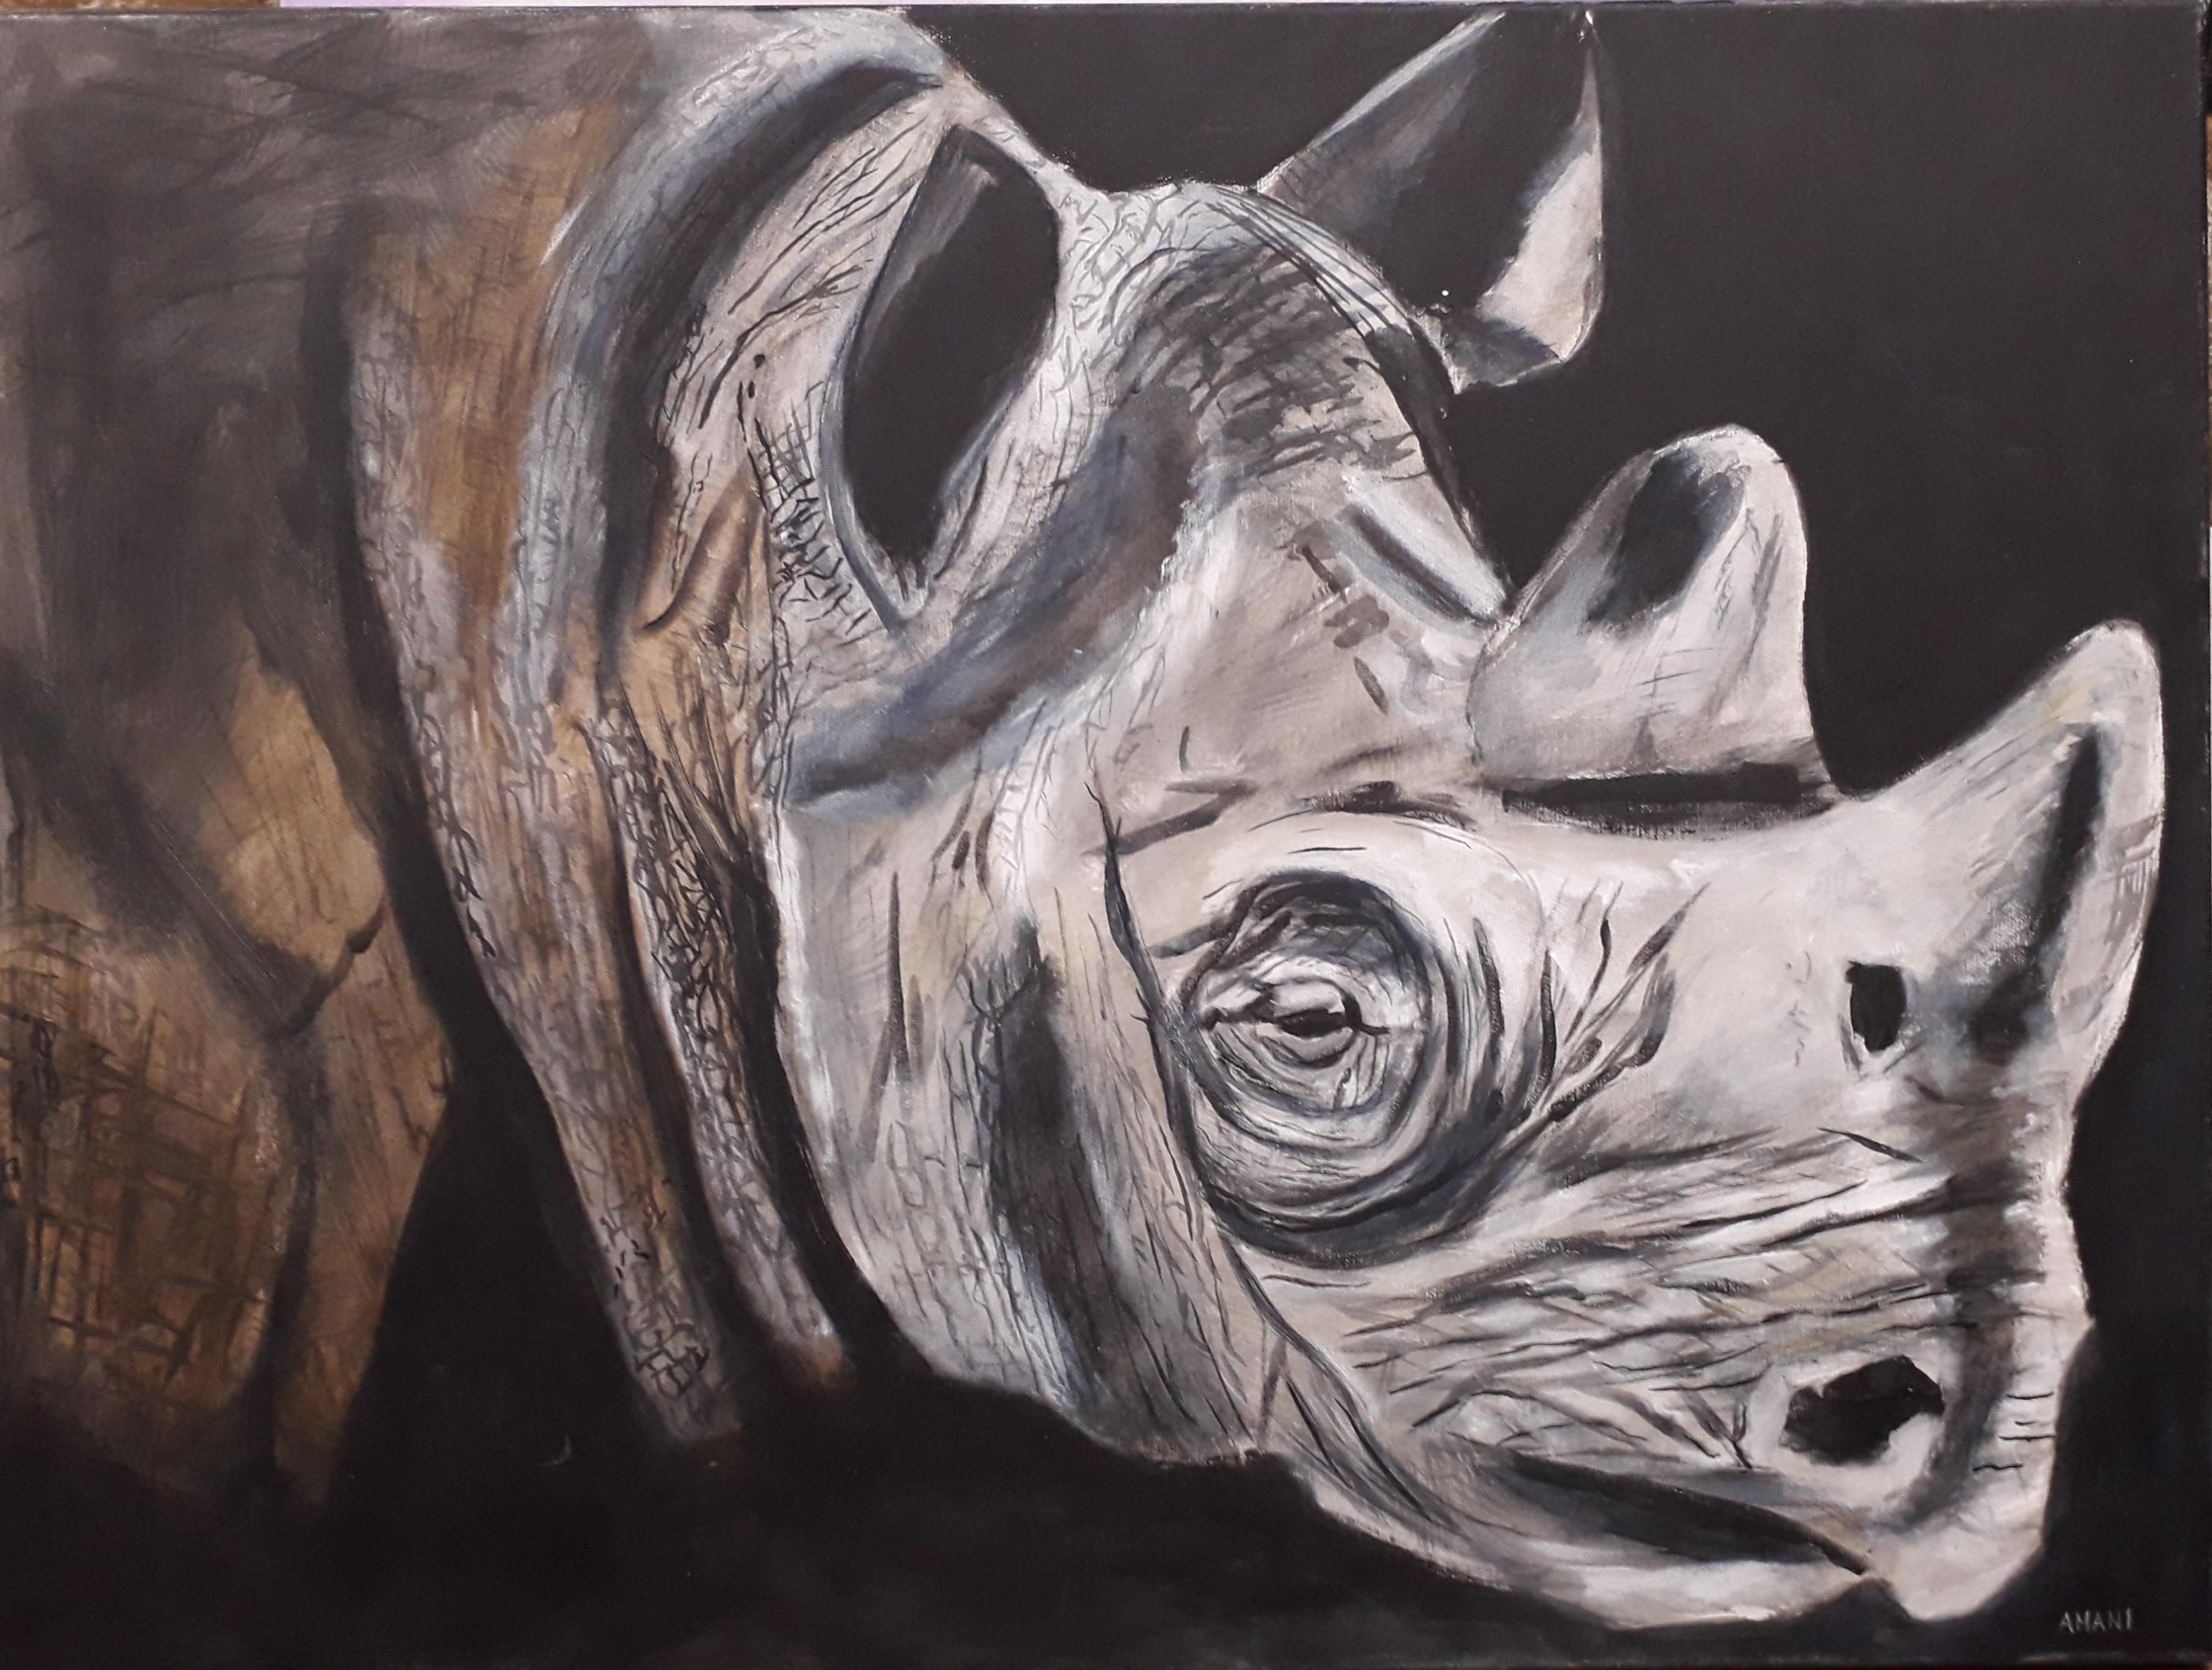 Anita Amani Dorp - "Rhino".

Amani Dorp has been fascinated by the perfection and grandness of nature since her childhood, which as the source of art is always the starting point for her inspiration.
The result is abstract, color-intensive works